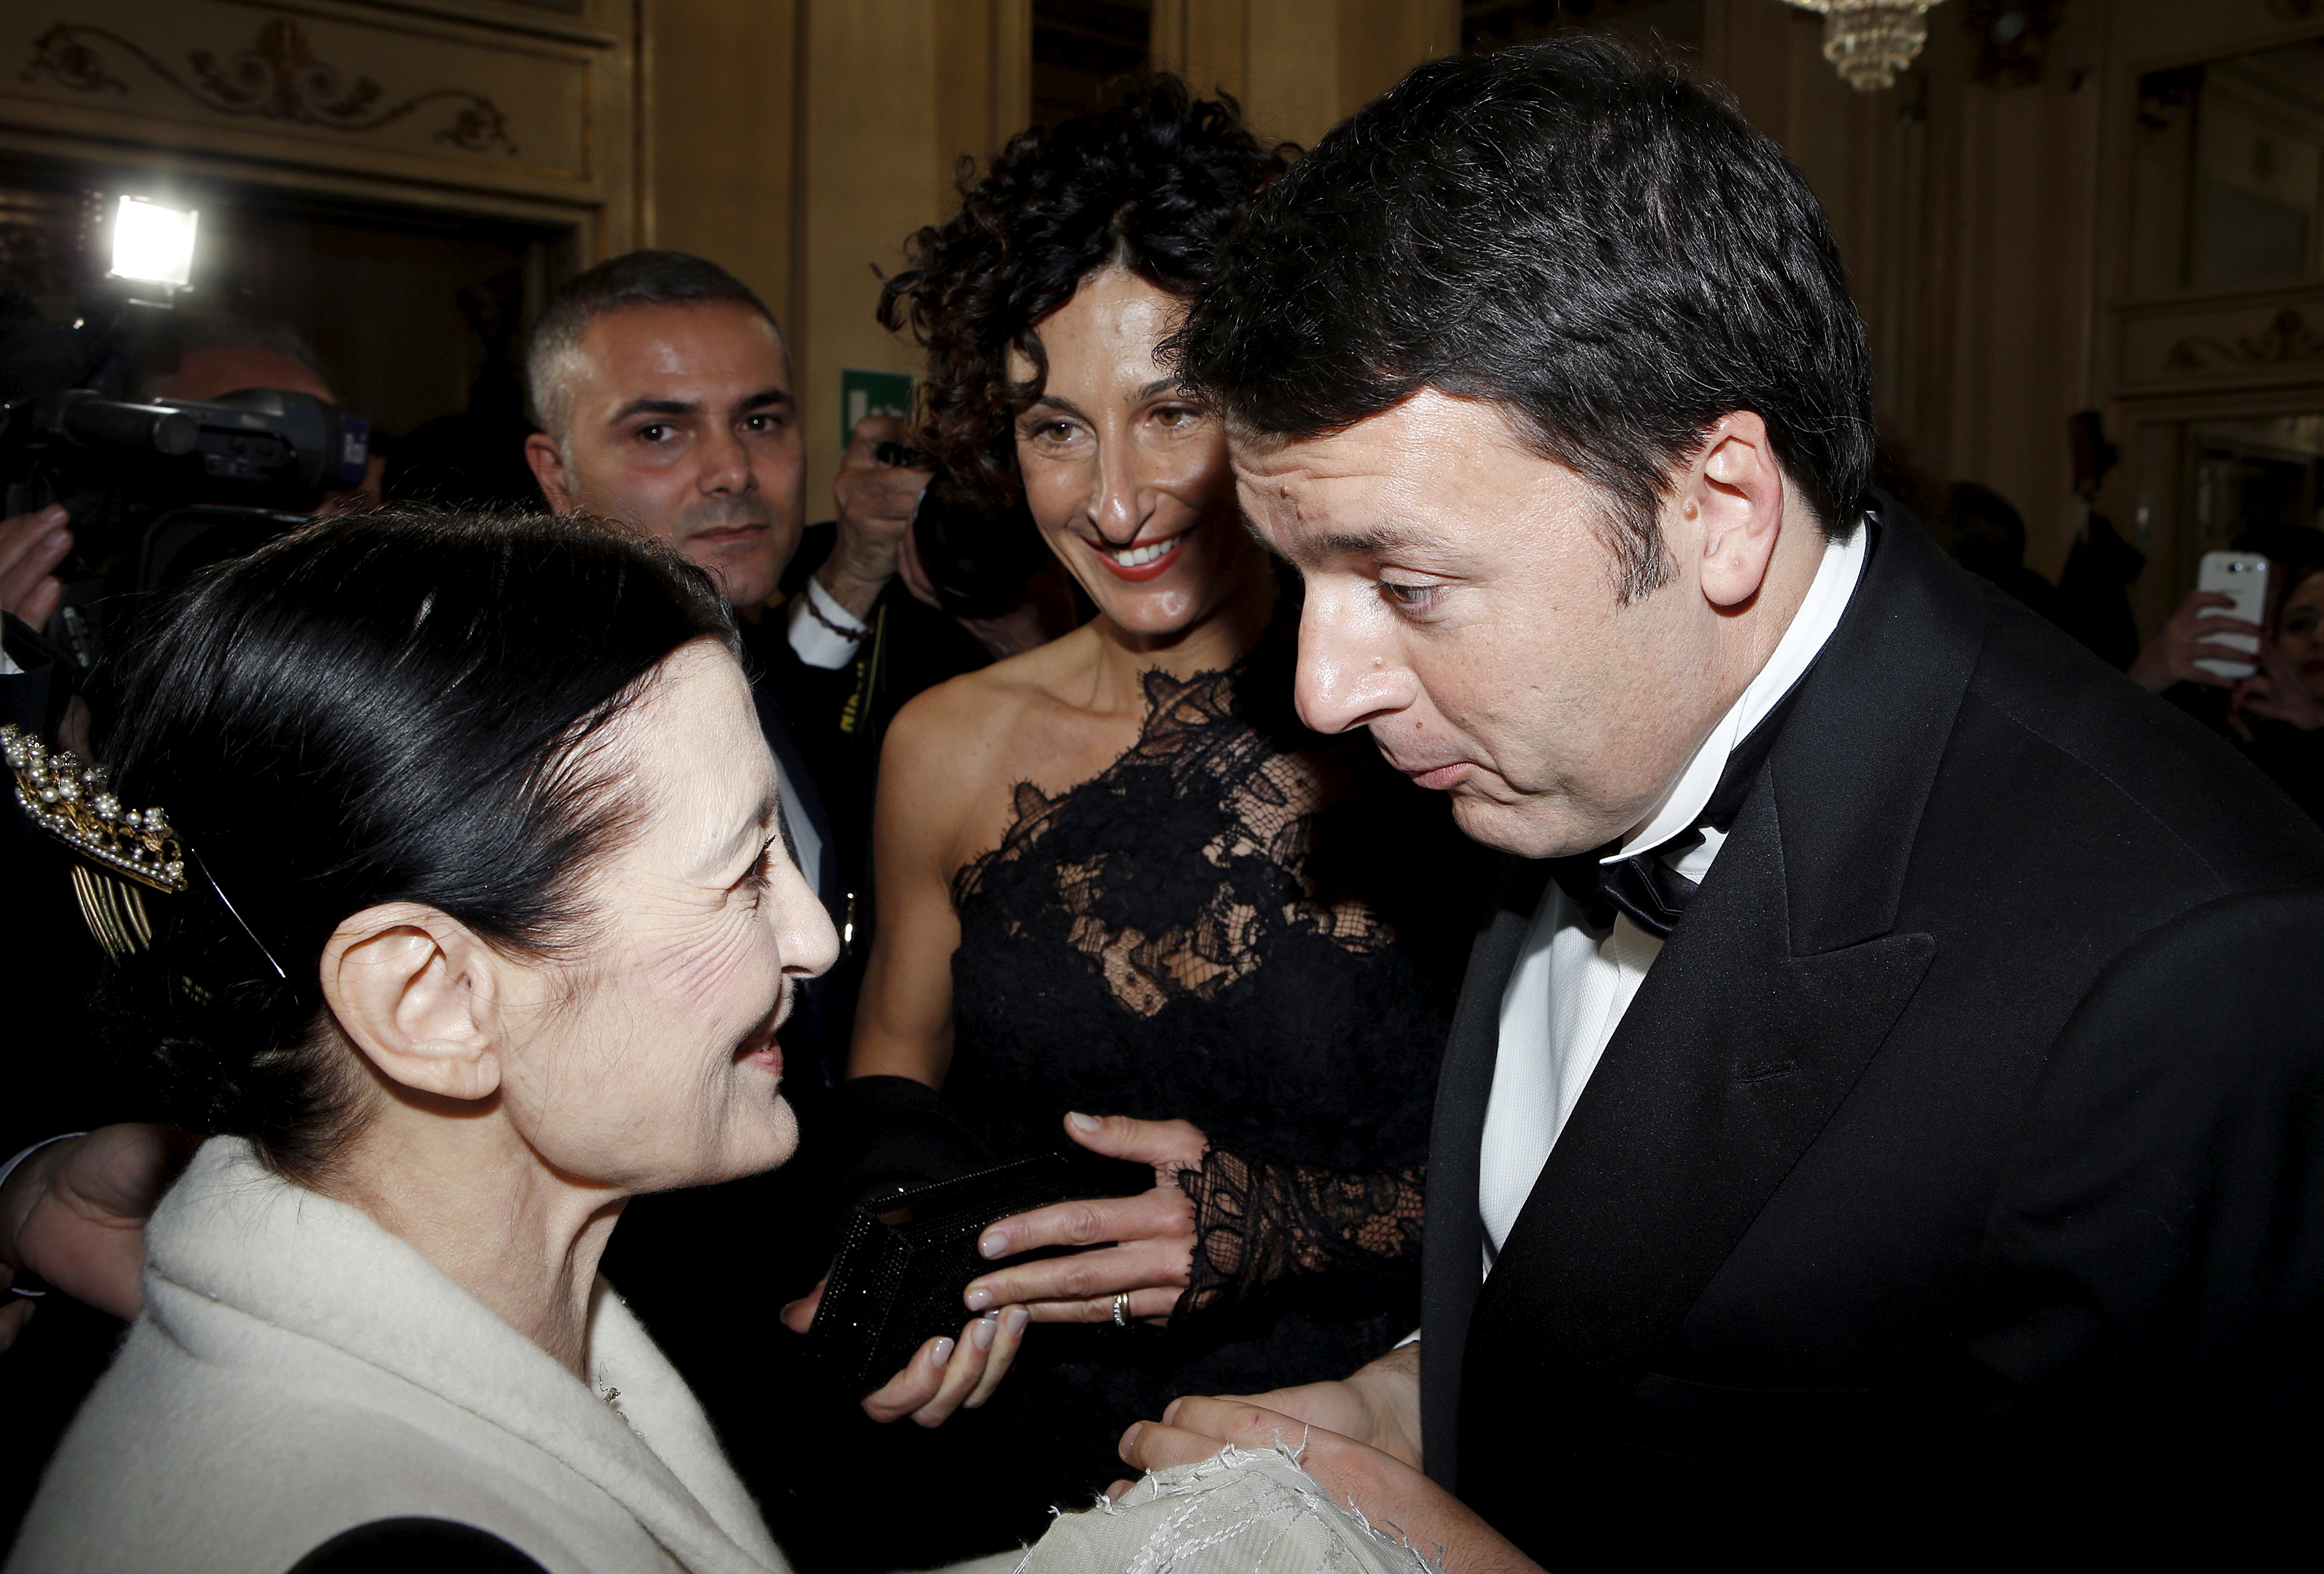 Italian PM Renzi and his wife Agense meets International classic dancer Fracci at the end of the Verdi's Joan of Arc at Milan's La Scala opera house